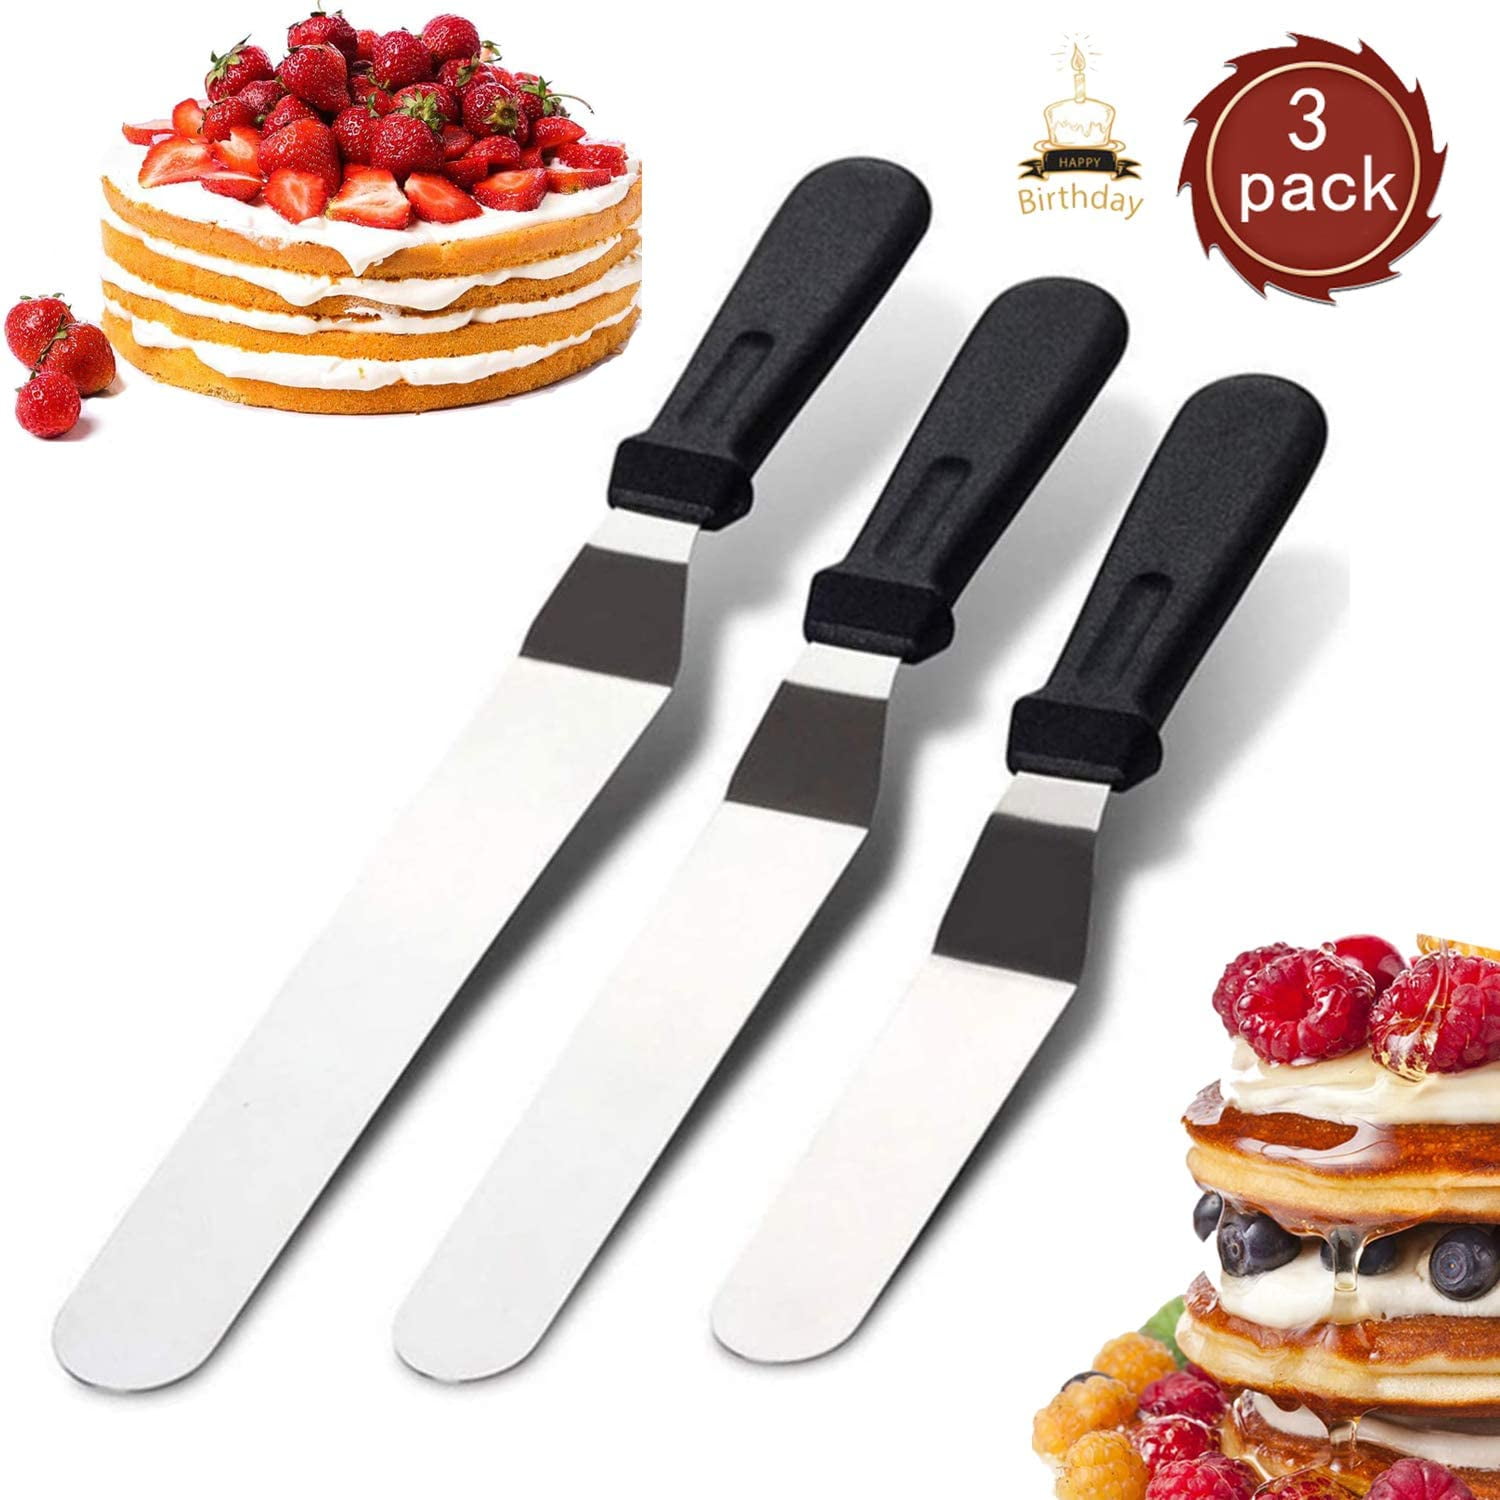 Set 3 Icing Spreader Spatula Cake Decoration Pasta Dough Cutter Cooking Tools